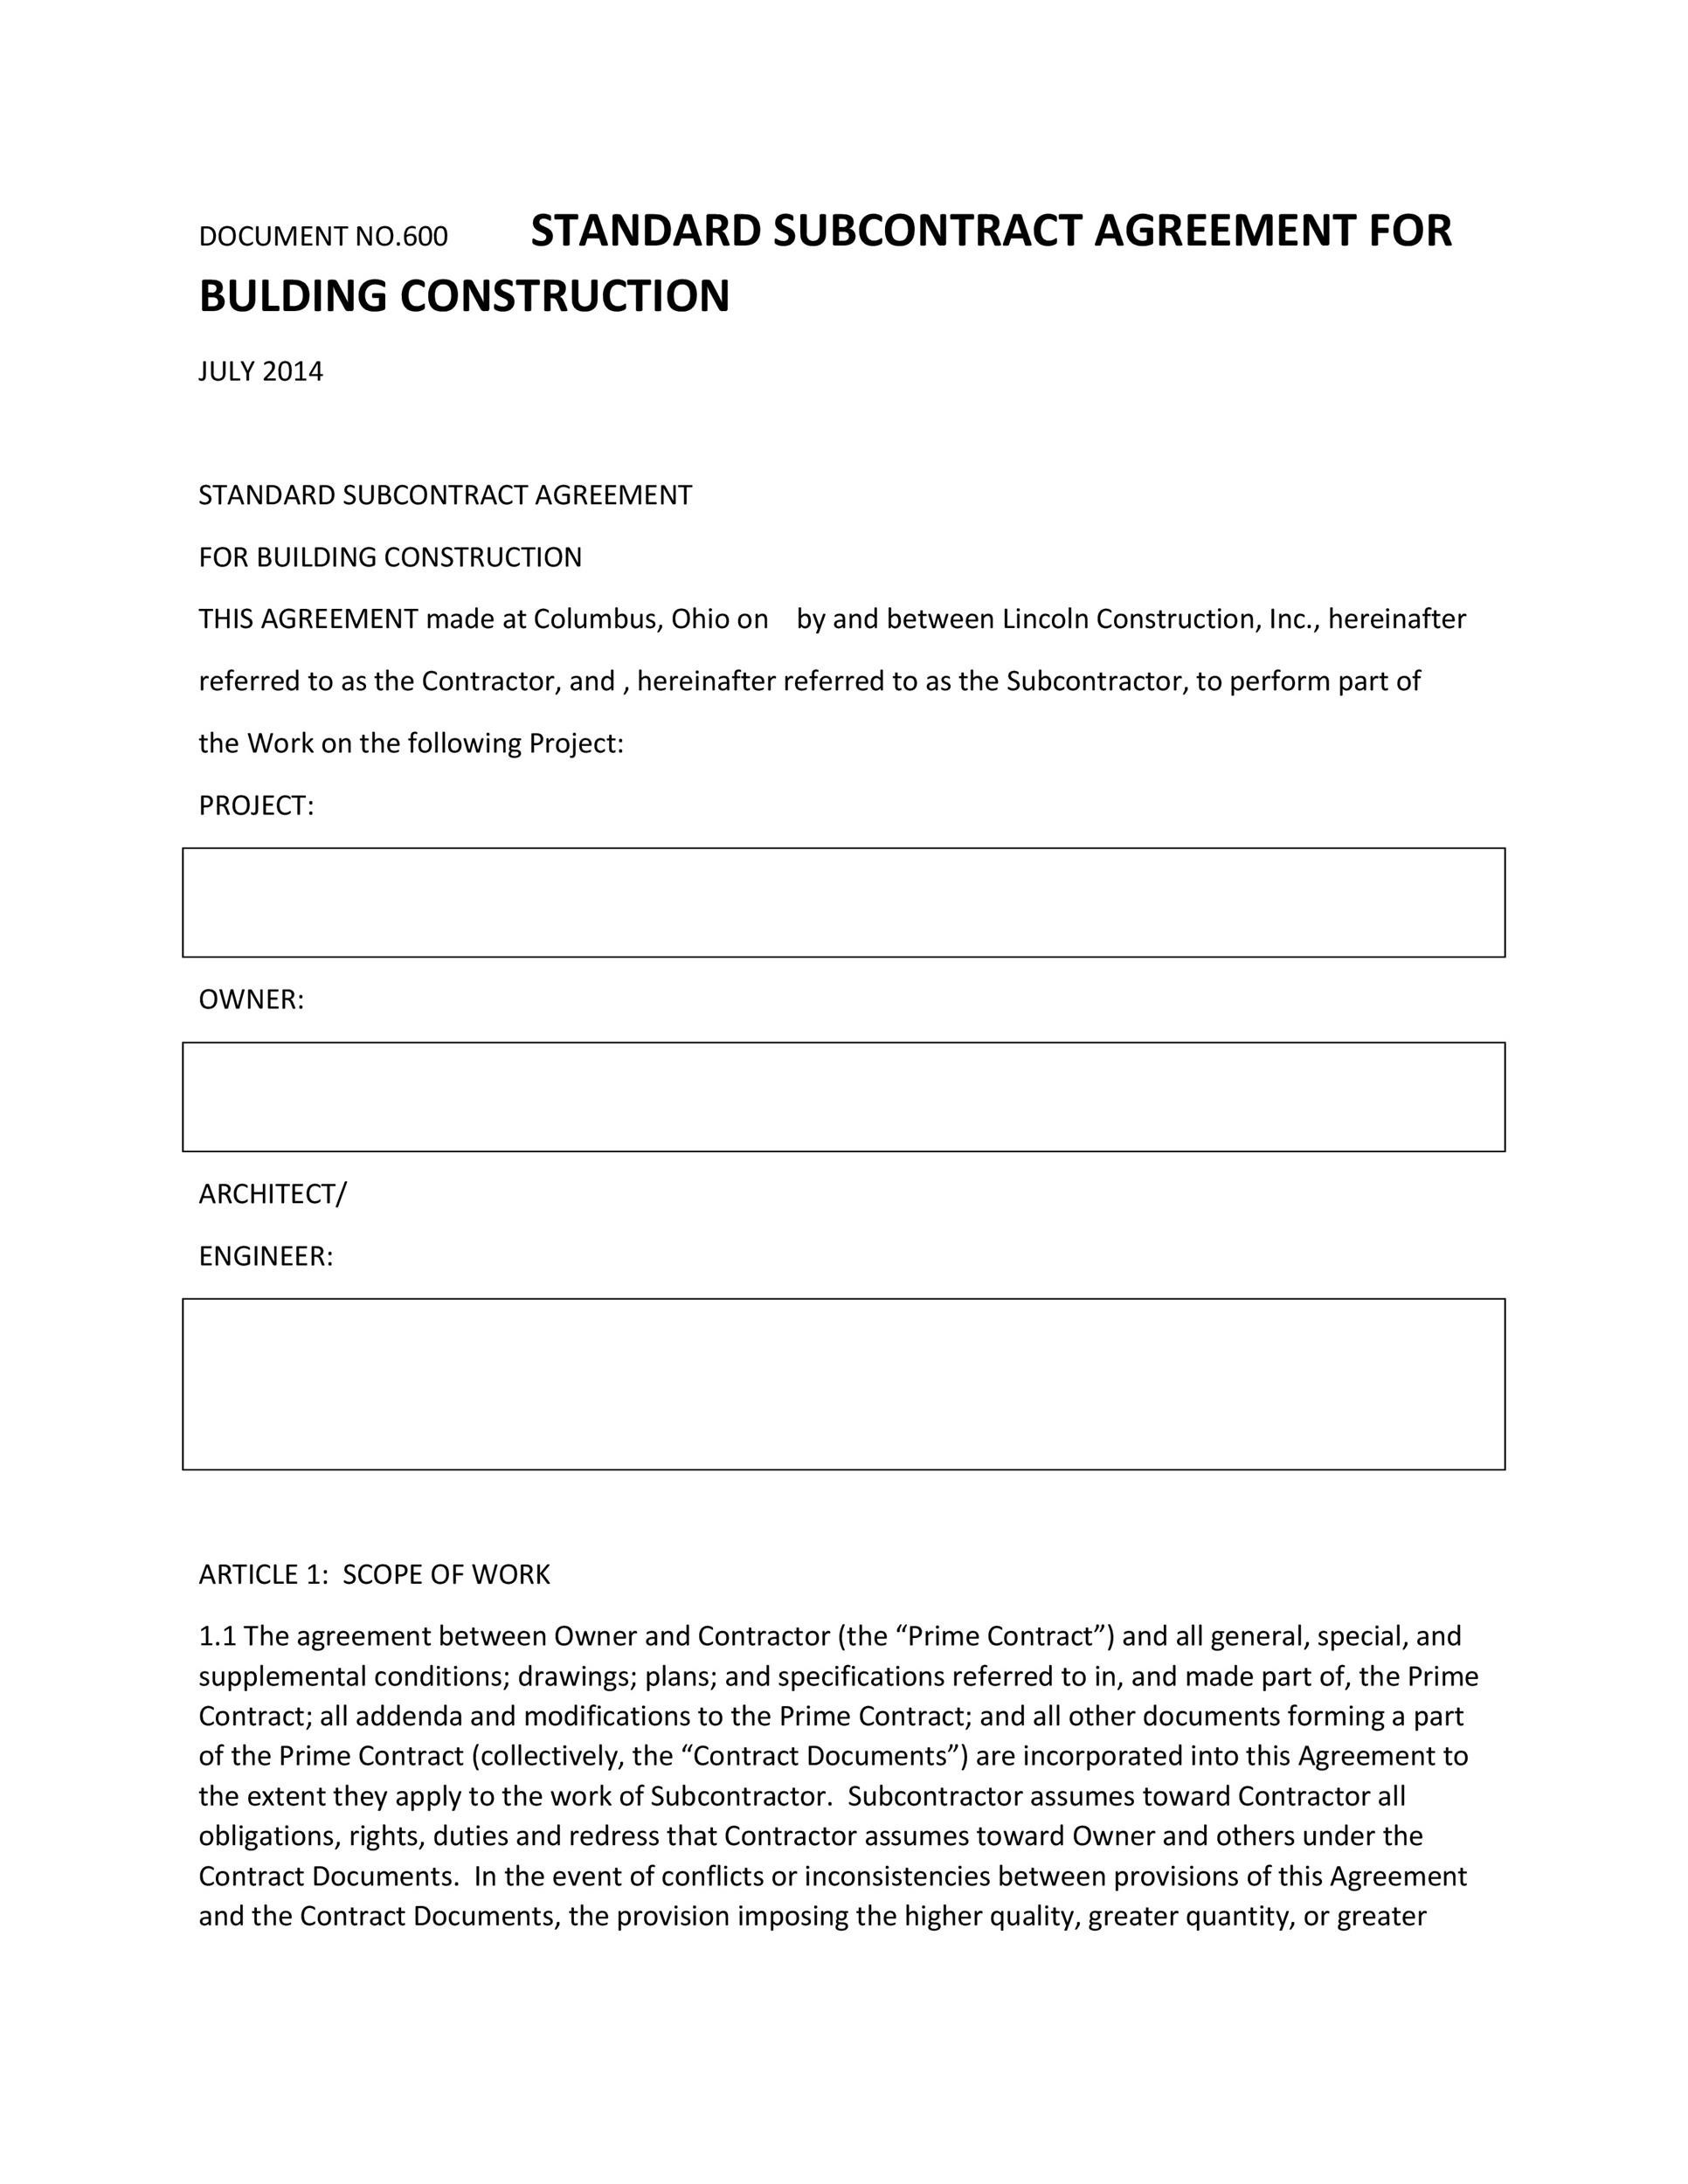 Free Subcontractor Agreement 23